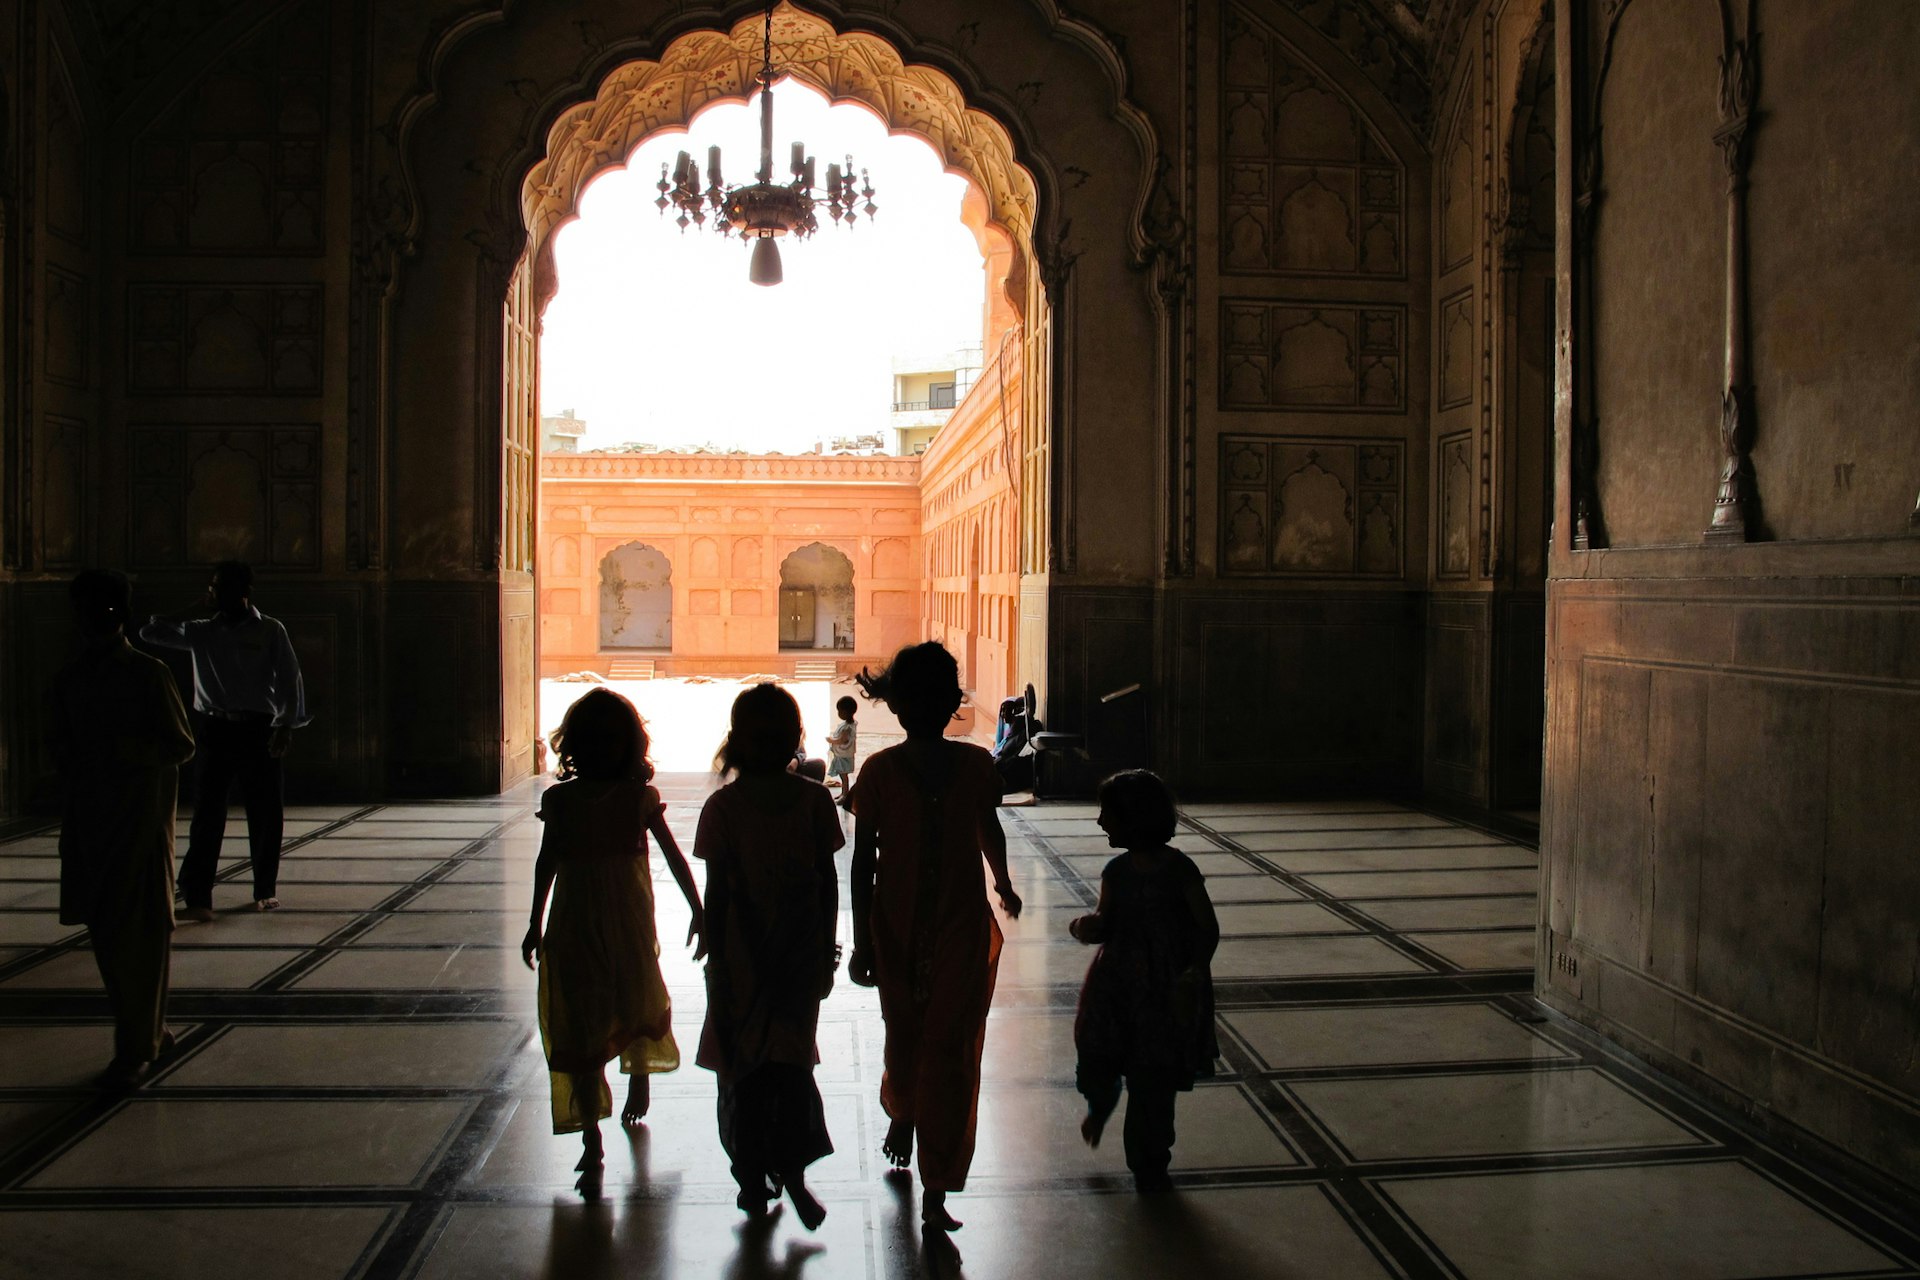 Four children in silhouette as they make their way through a mosque complex